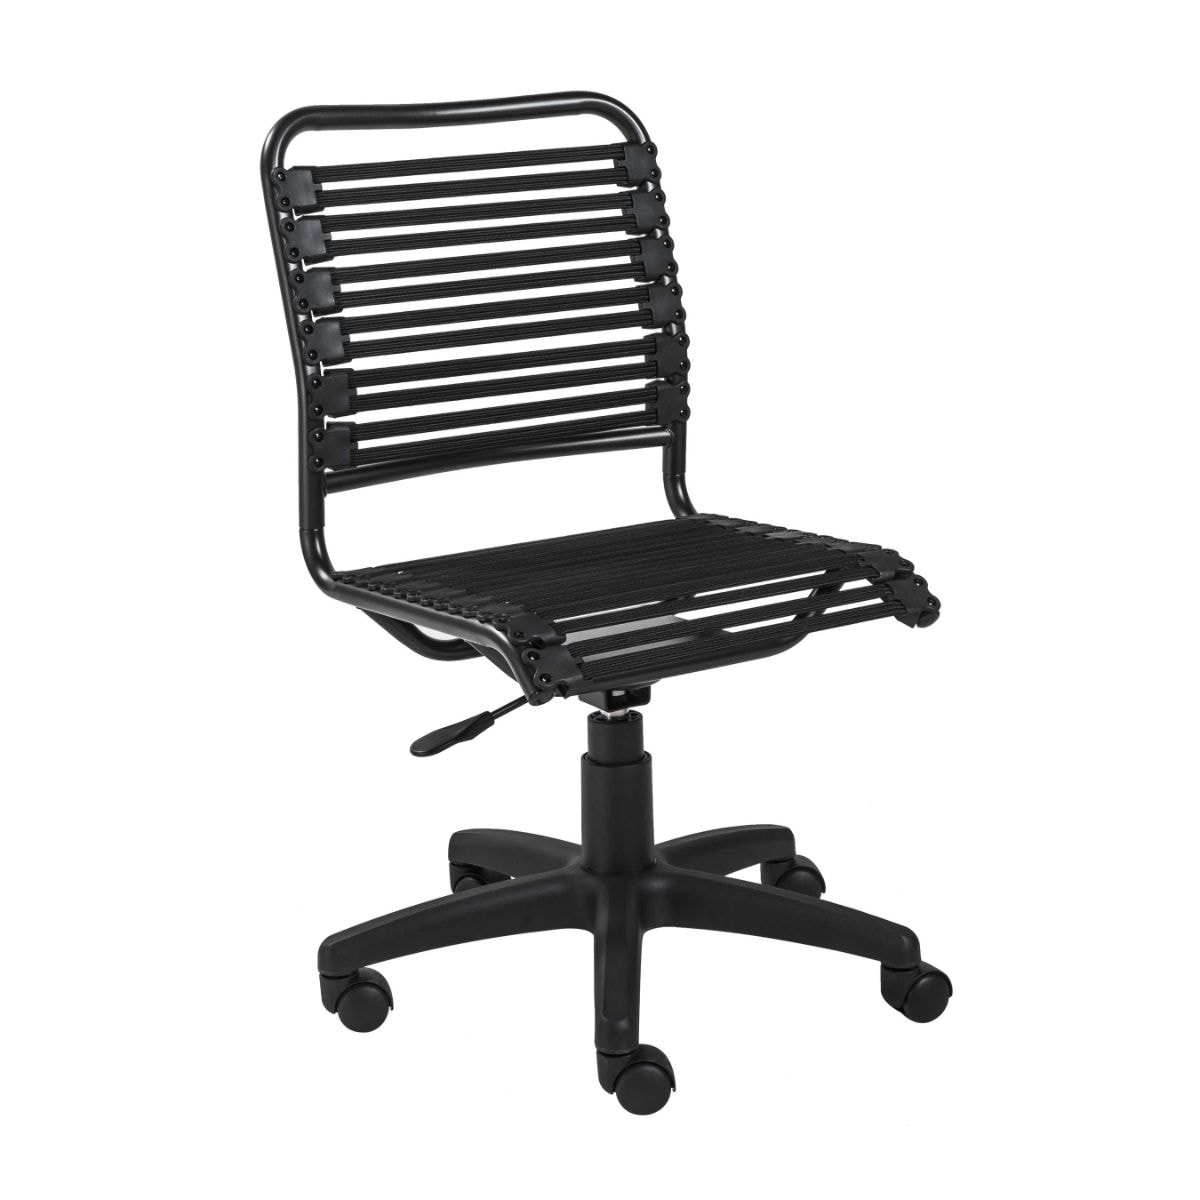 with Flat Elastic Bungie Straps Adjustable Height Dark Grey Bungee Office Task Chair